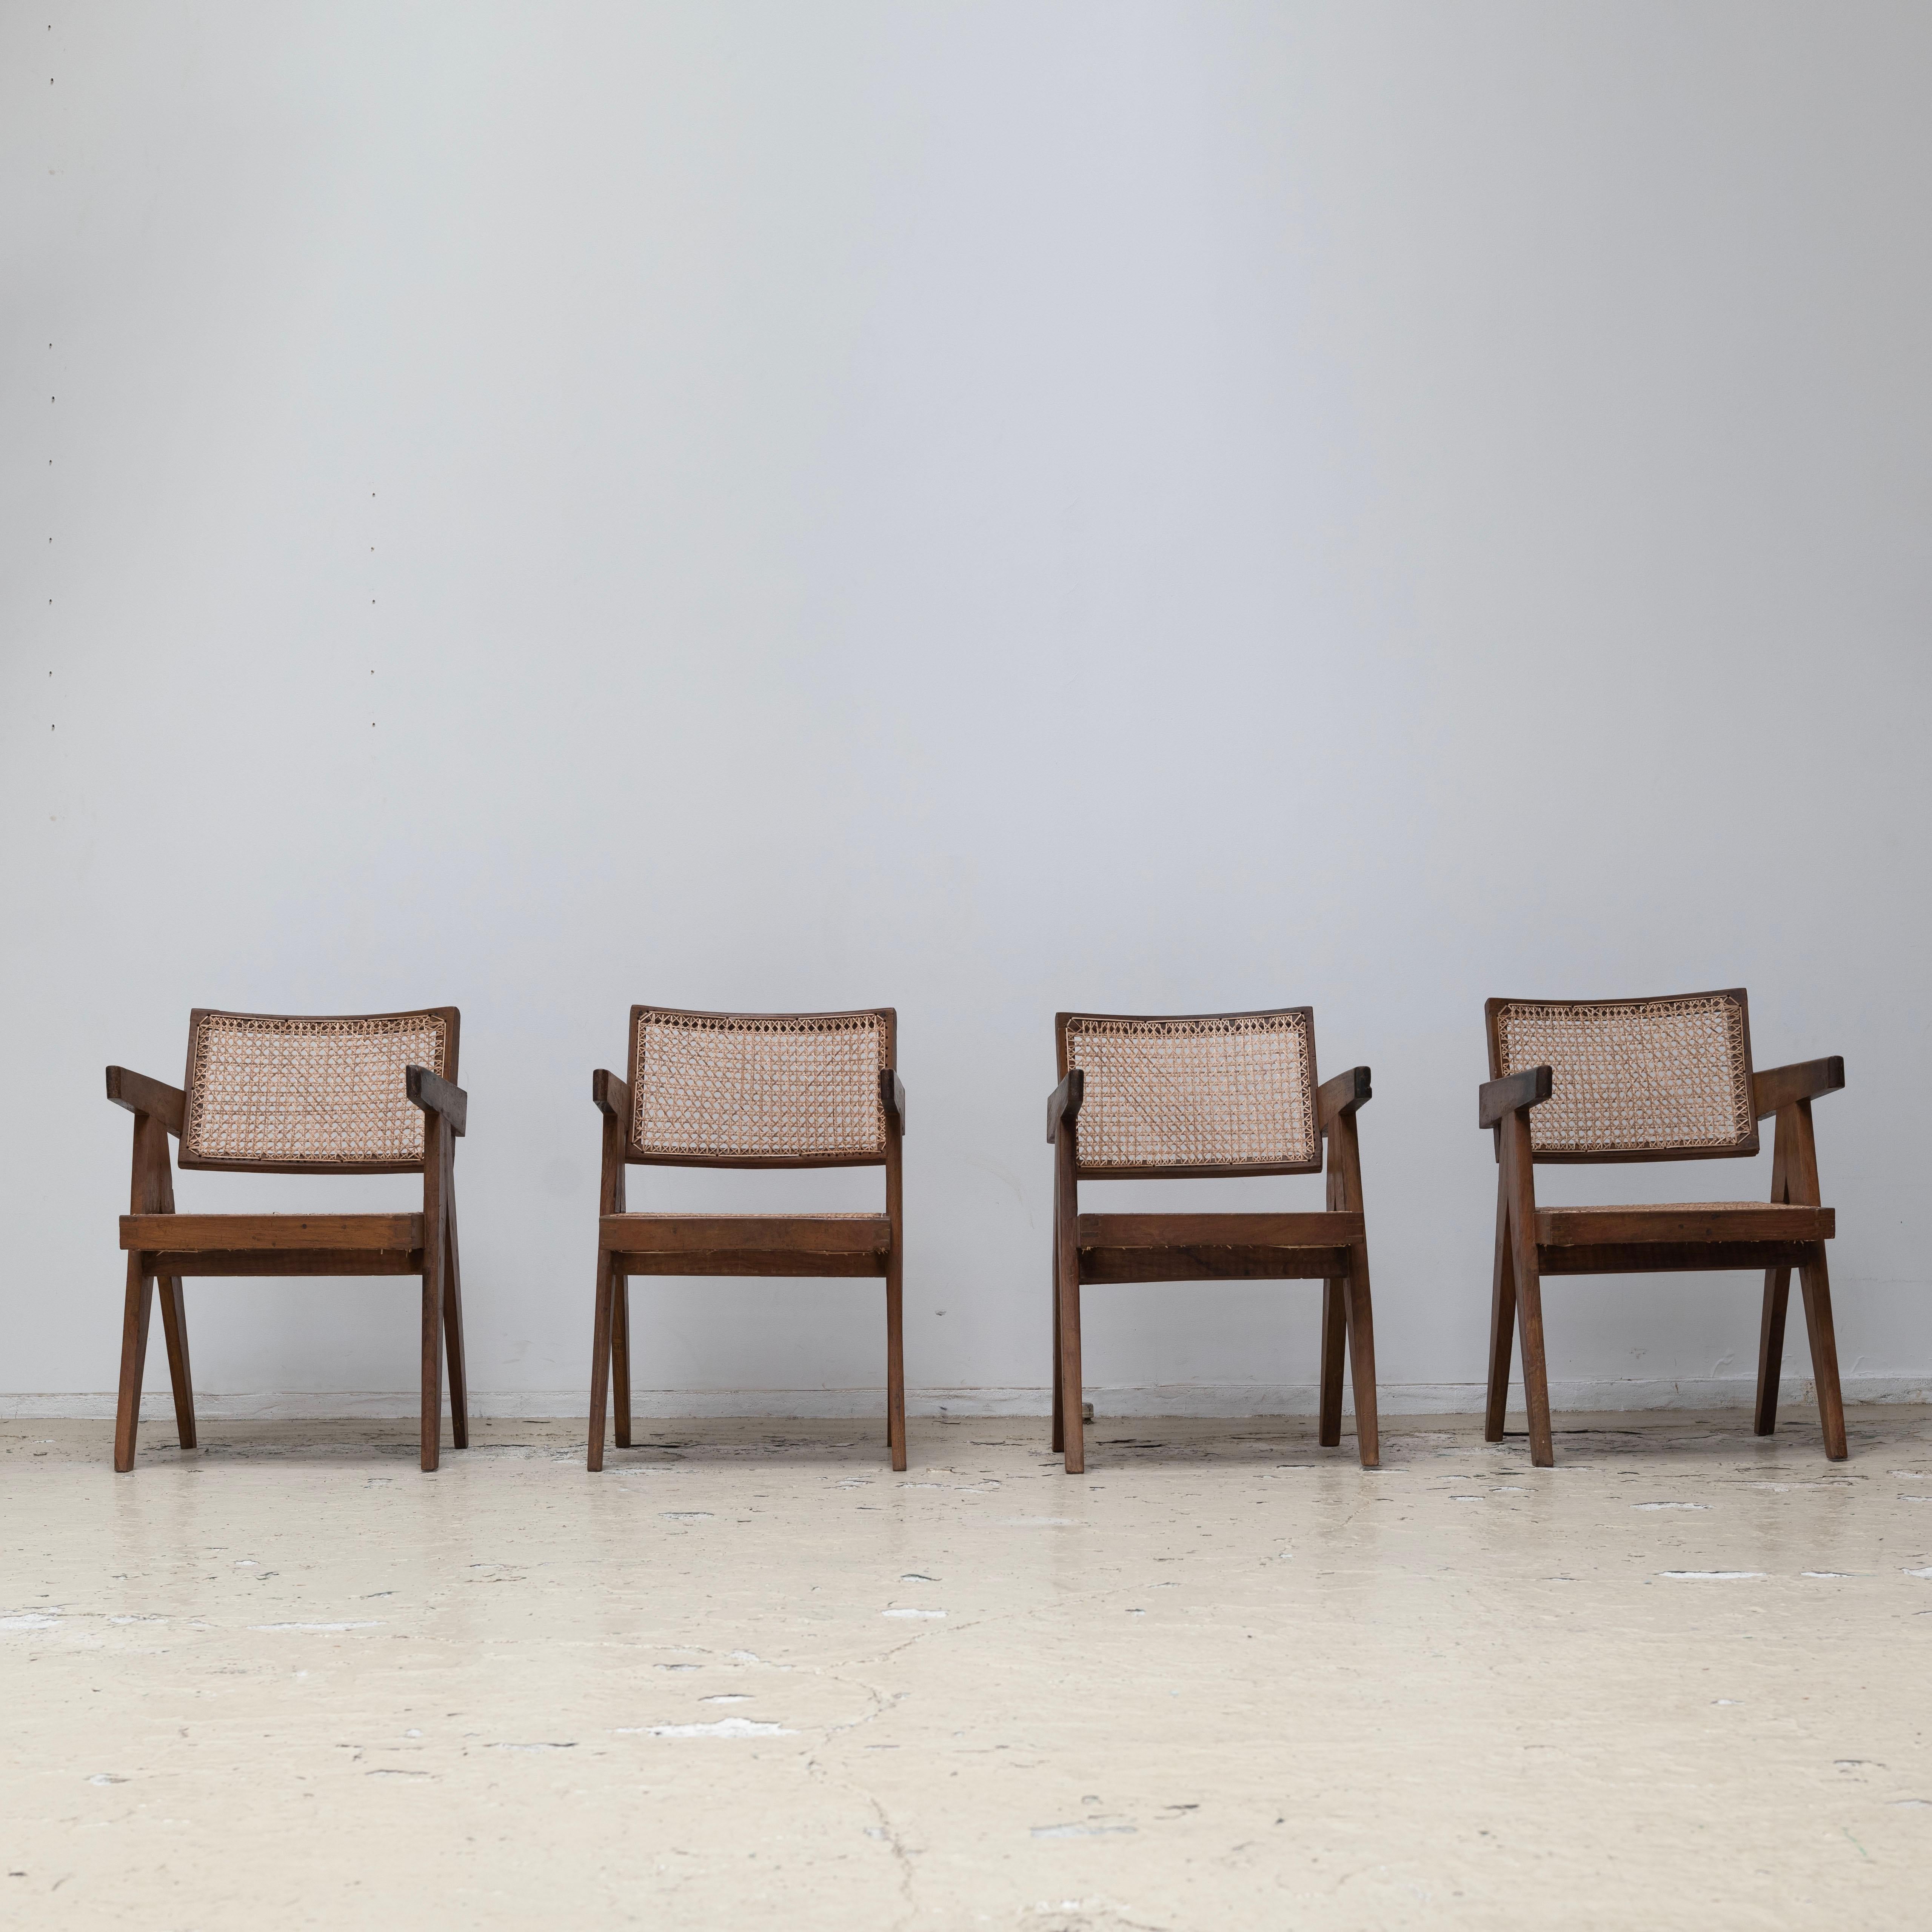 Mid-20th Century Pierre Jeanneret , Office Chair for Chandigarh, Teak , 1950s , Set of 4 For Sale